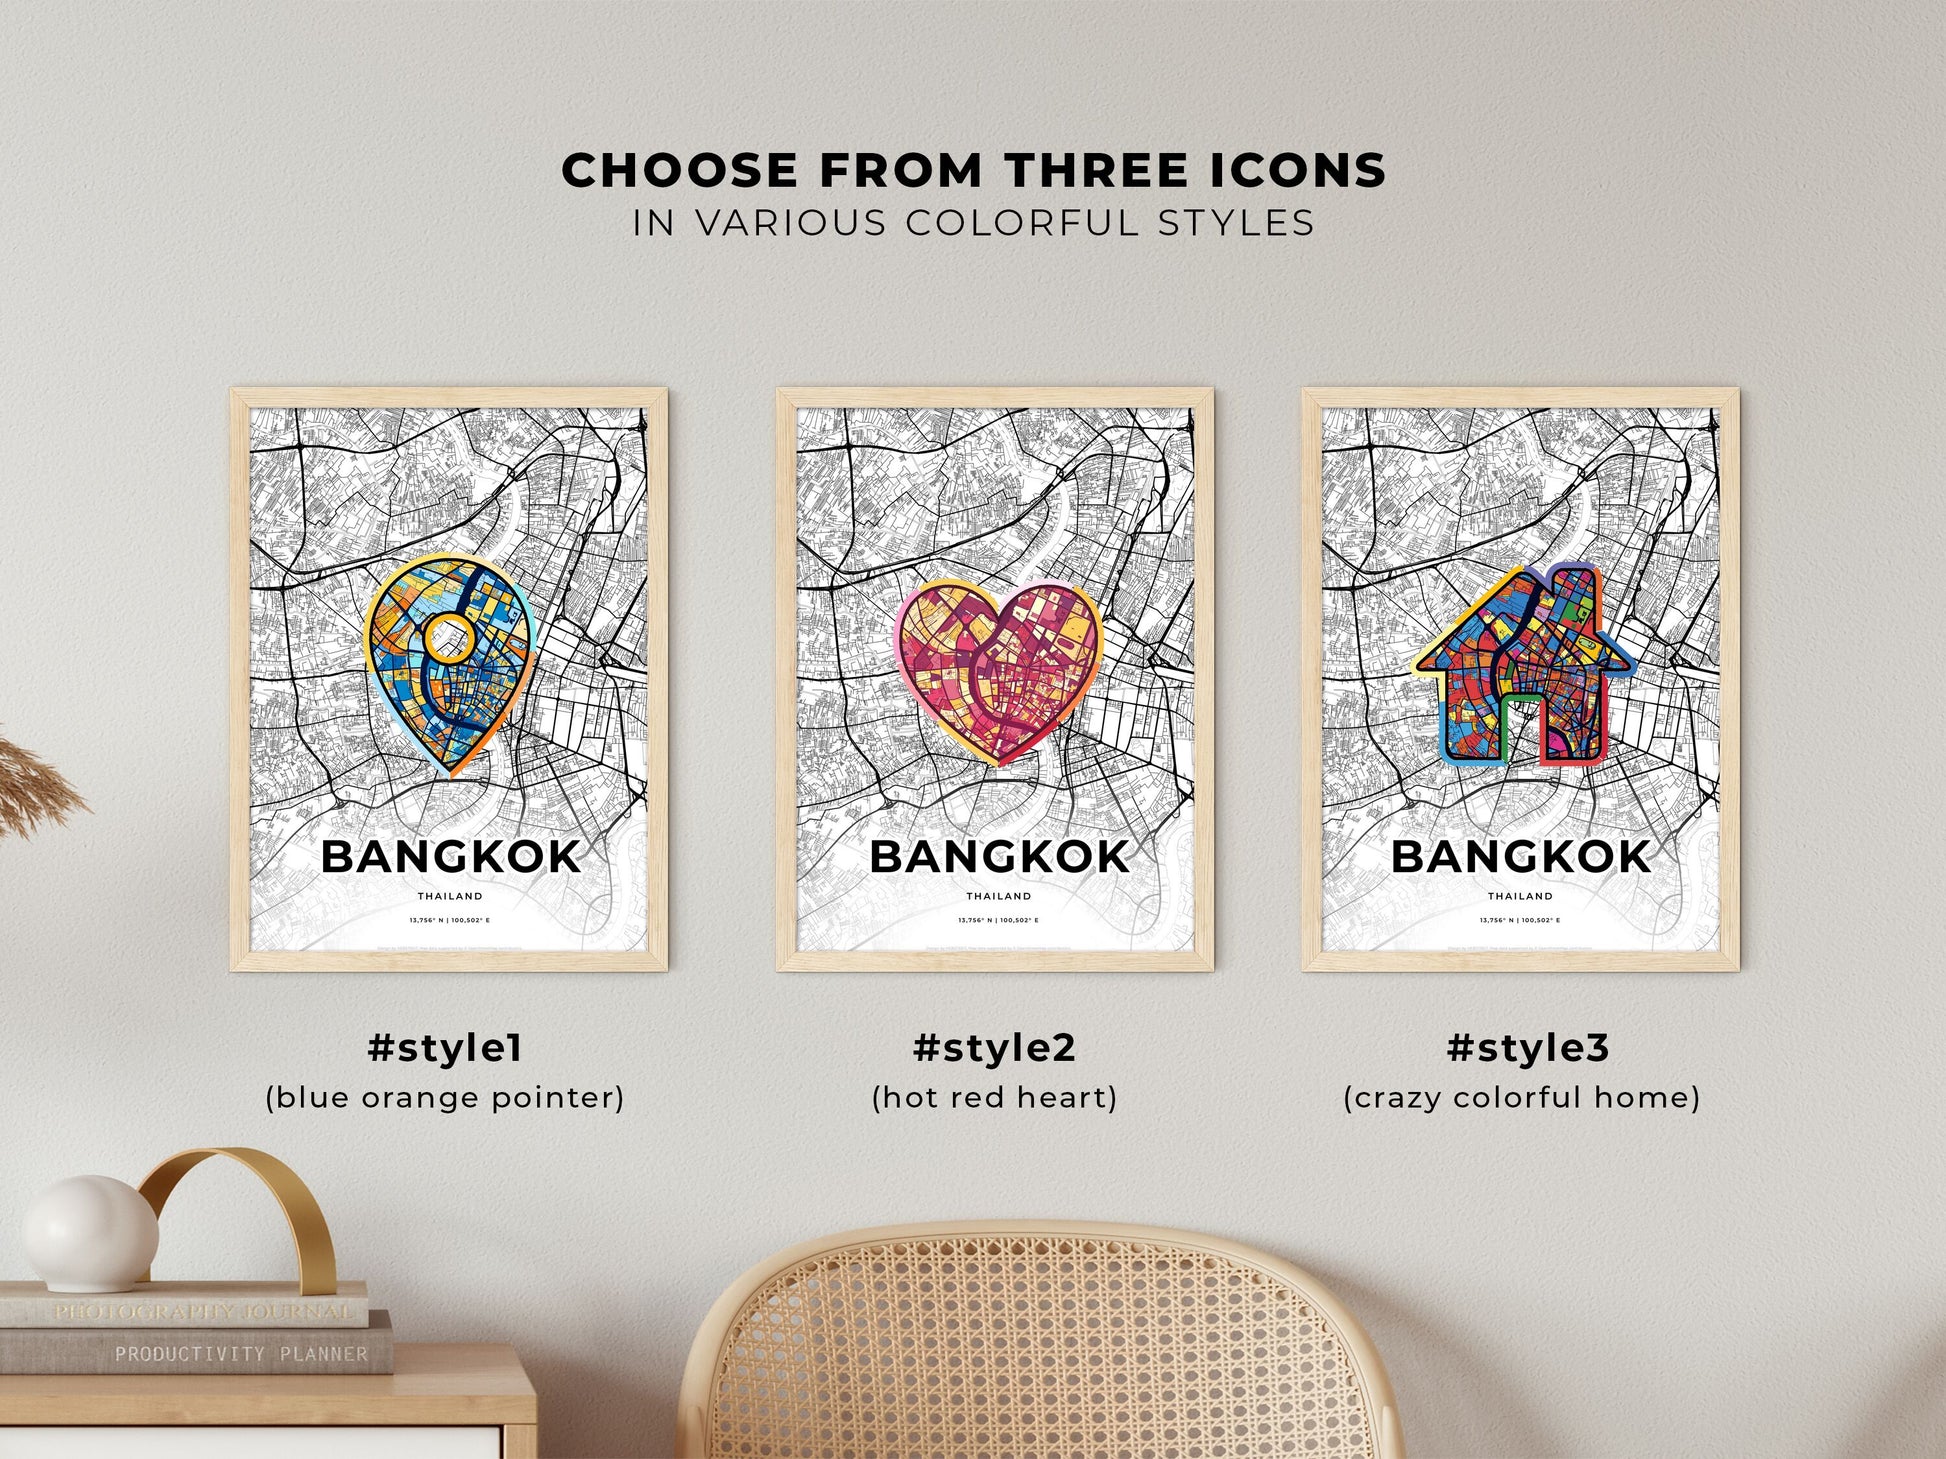 BANGKOK THAILAND minimal art map with a colorful icon. Where it all began, Couple map gift.